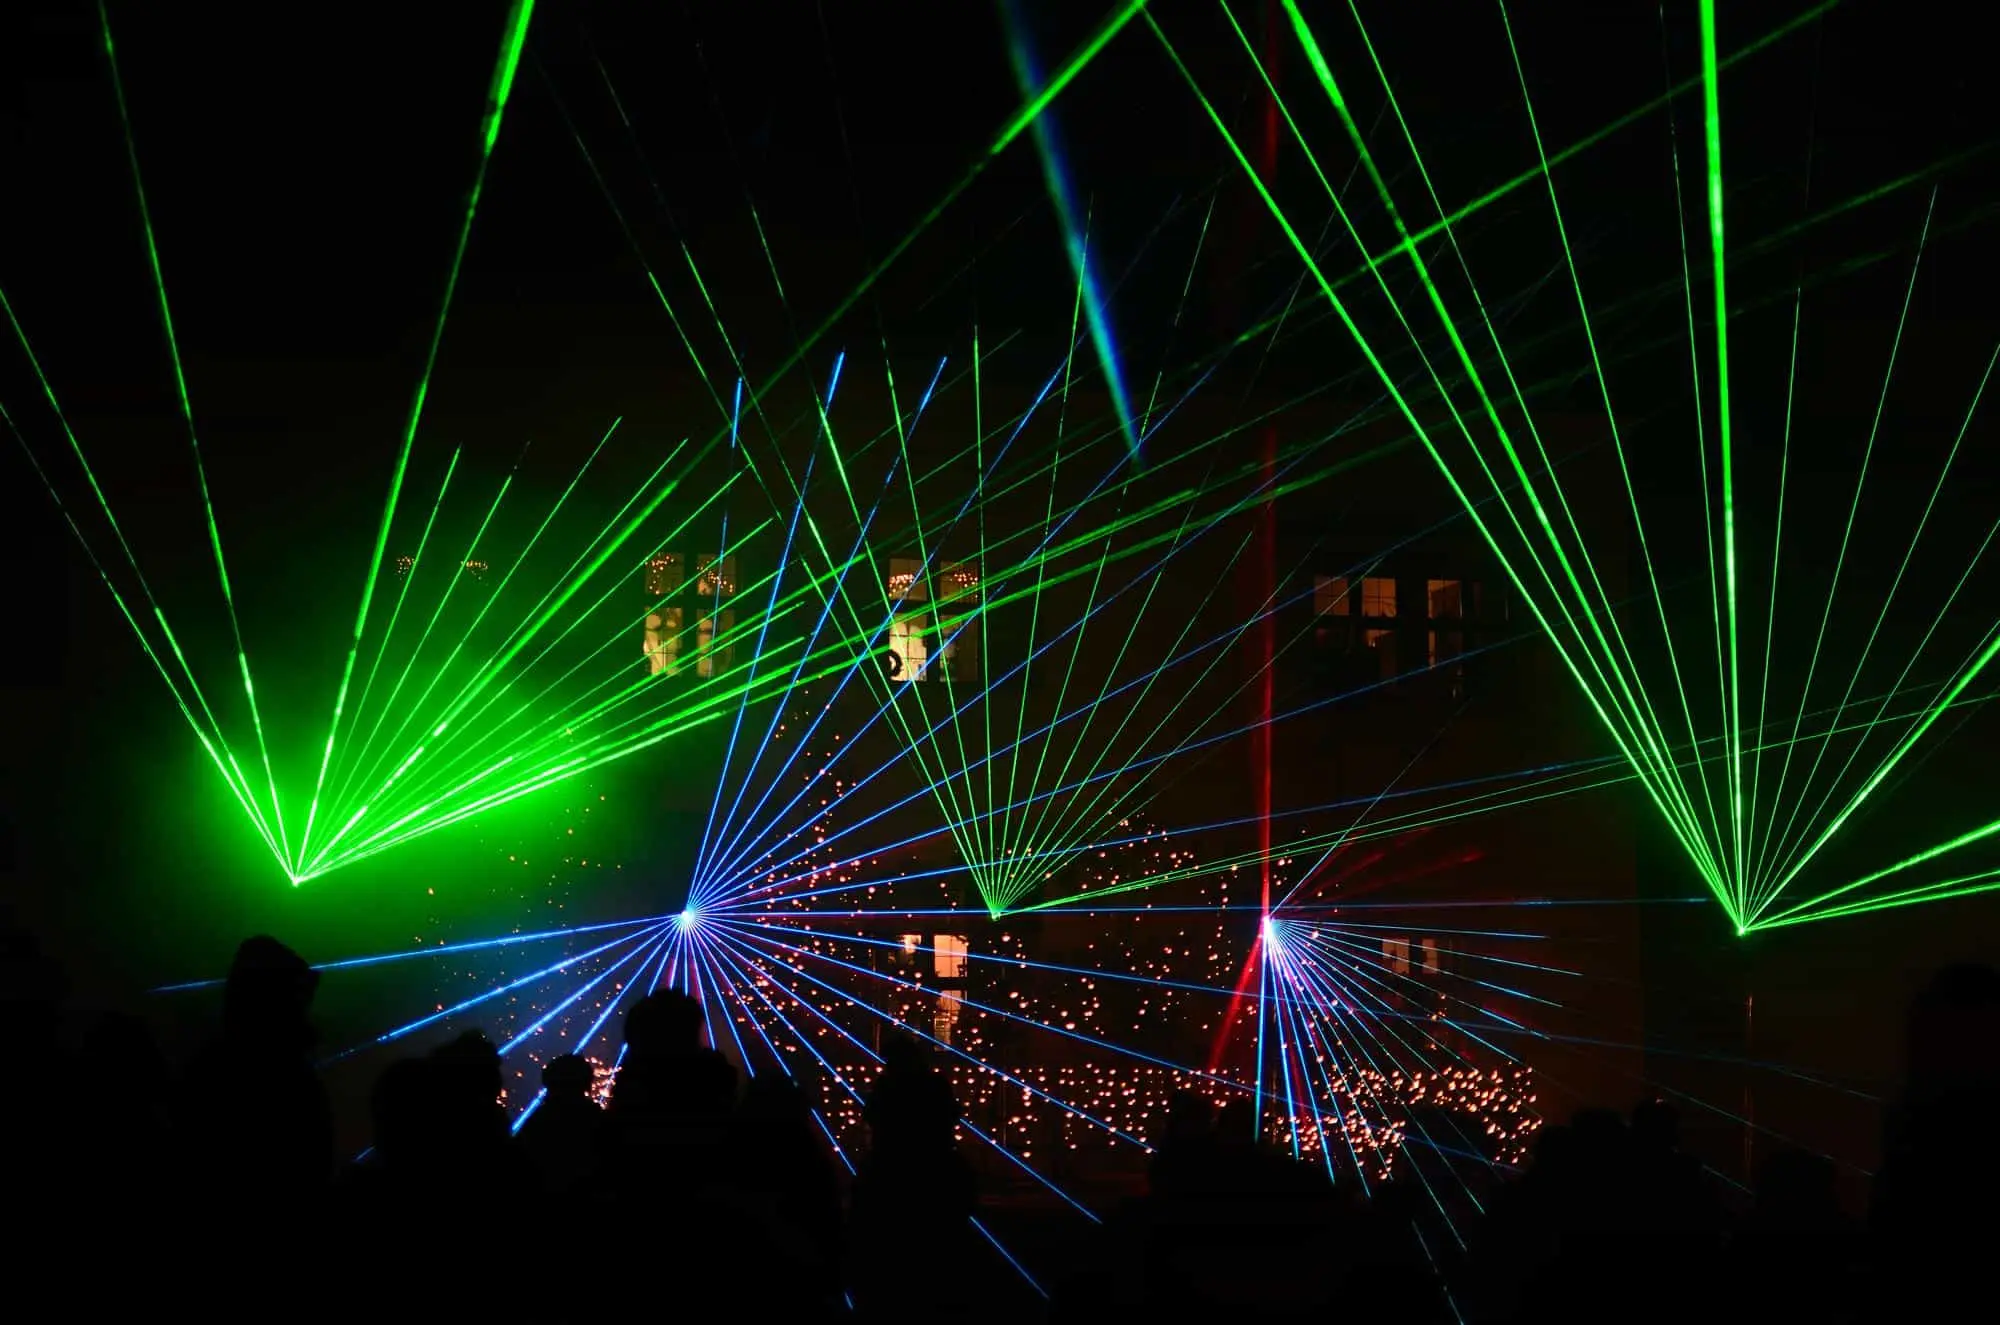 Benefits of Stage Laser Lights In Theater or Performance